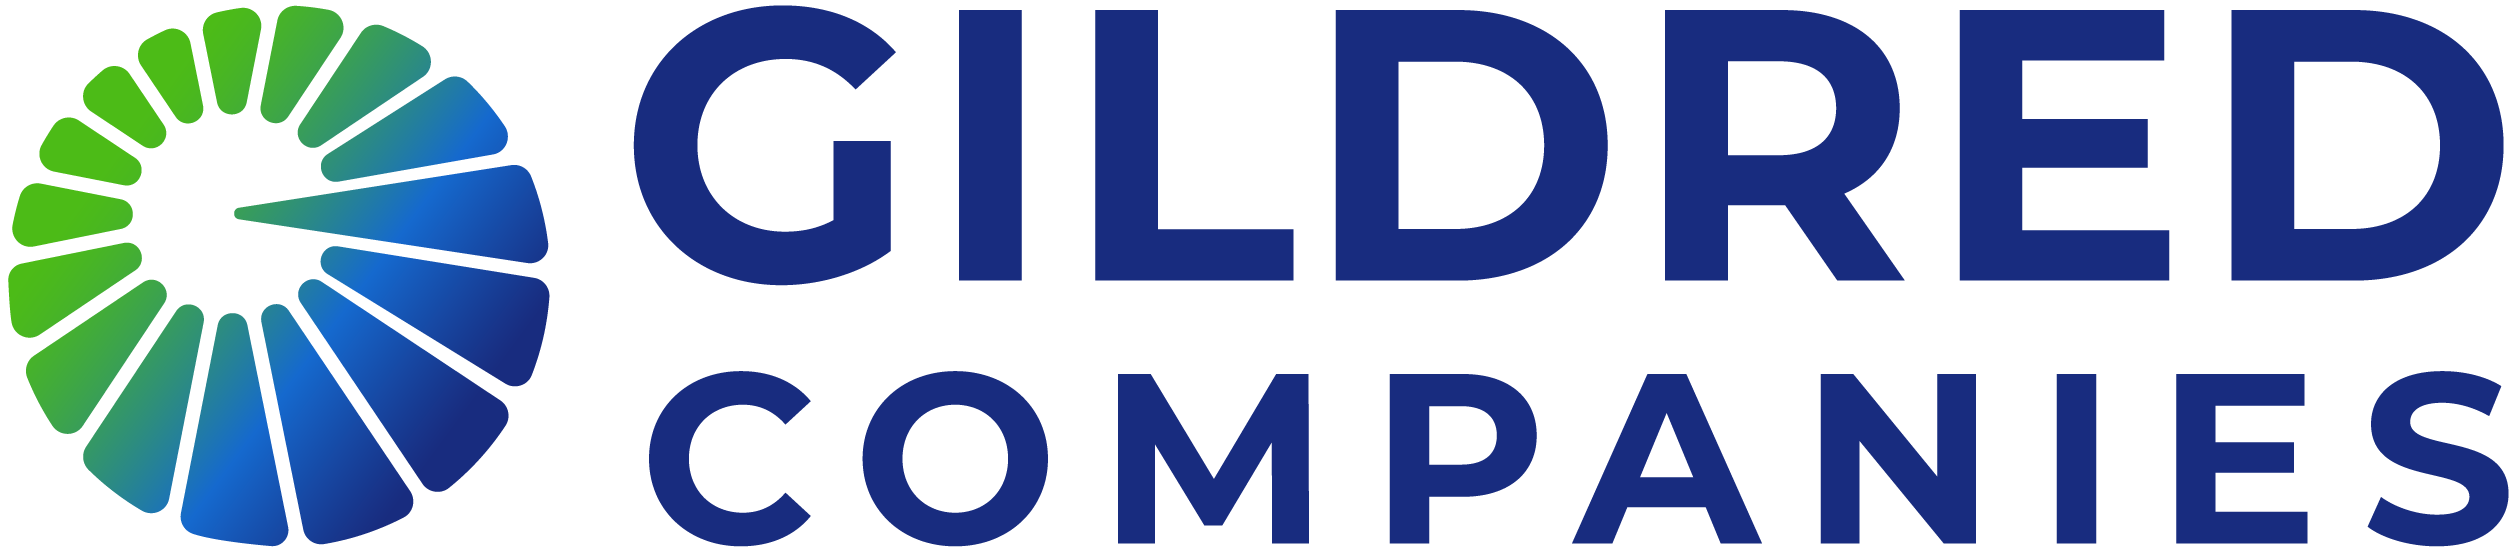 A blue and green icon accompanied by the company name: Gildred Companies